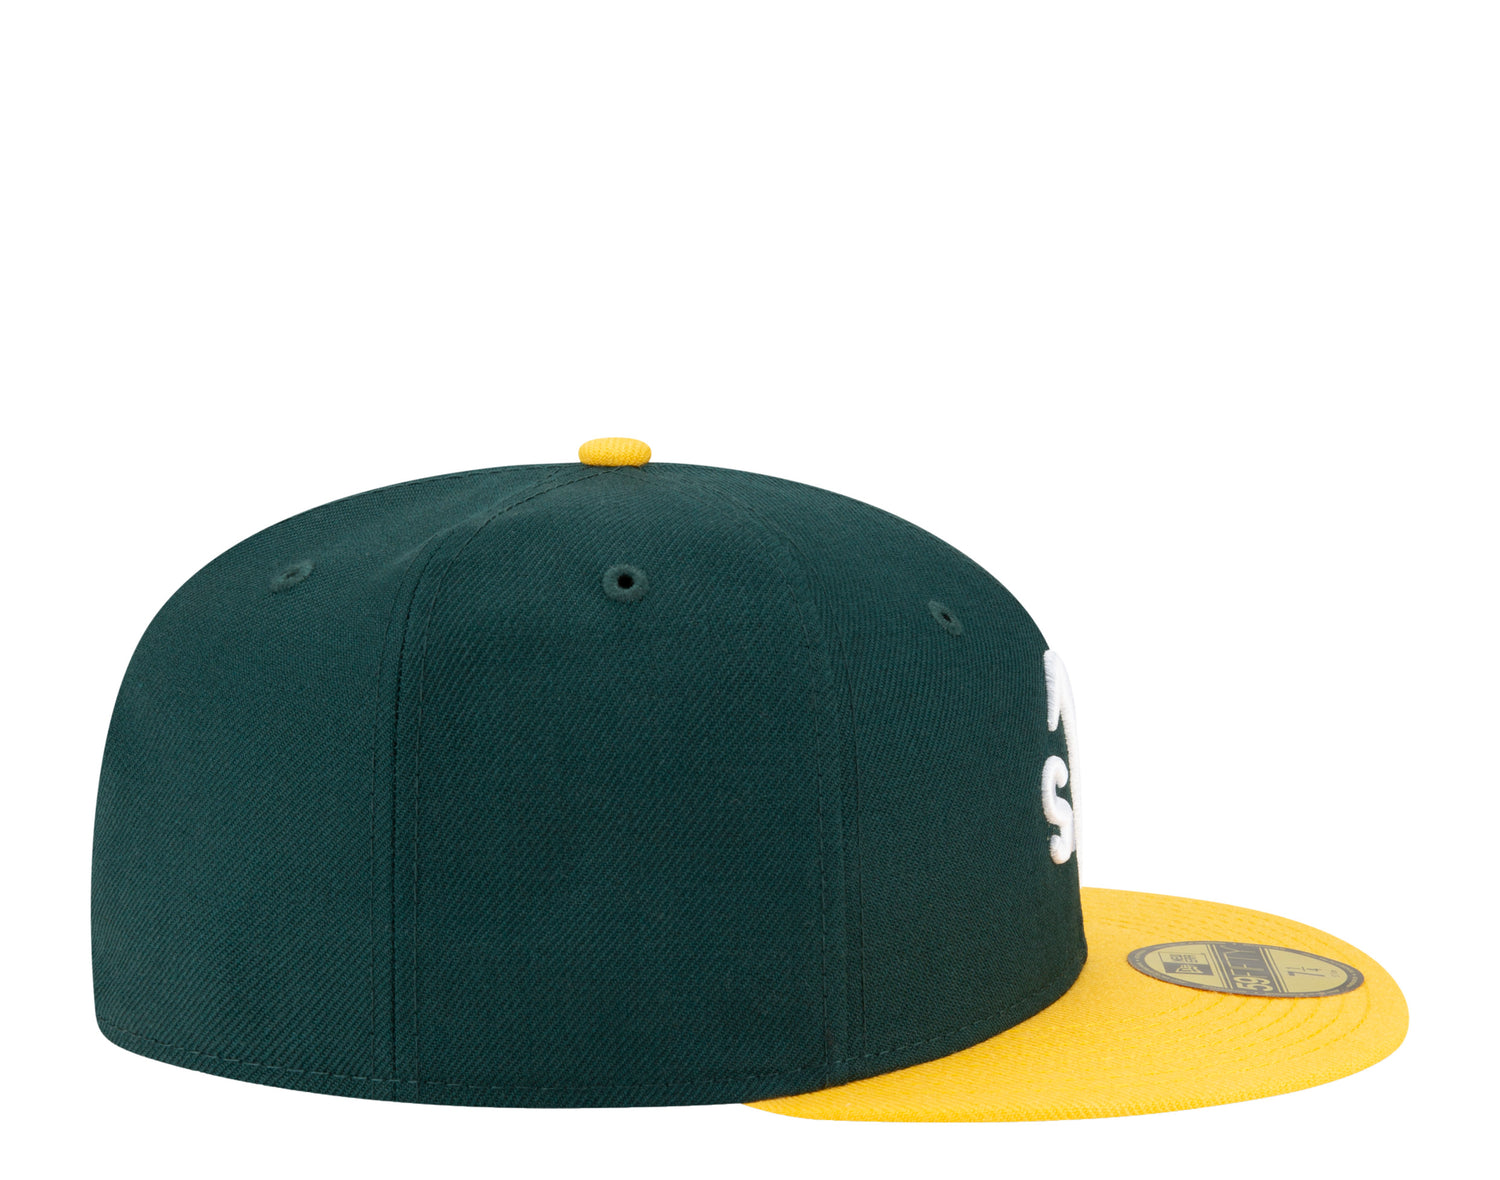 New Era 59Fifty MLB Oakland Athletics Upside Down Logo Fitted Hat